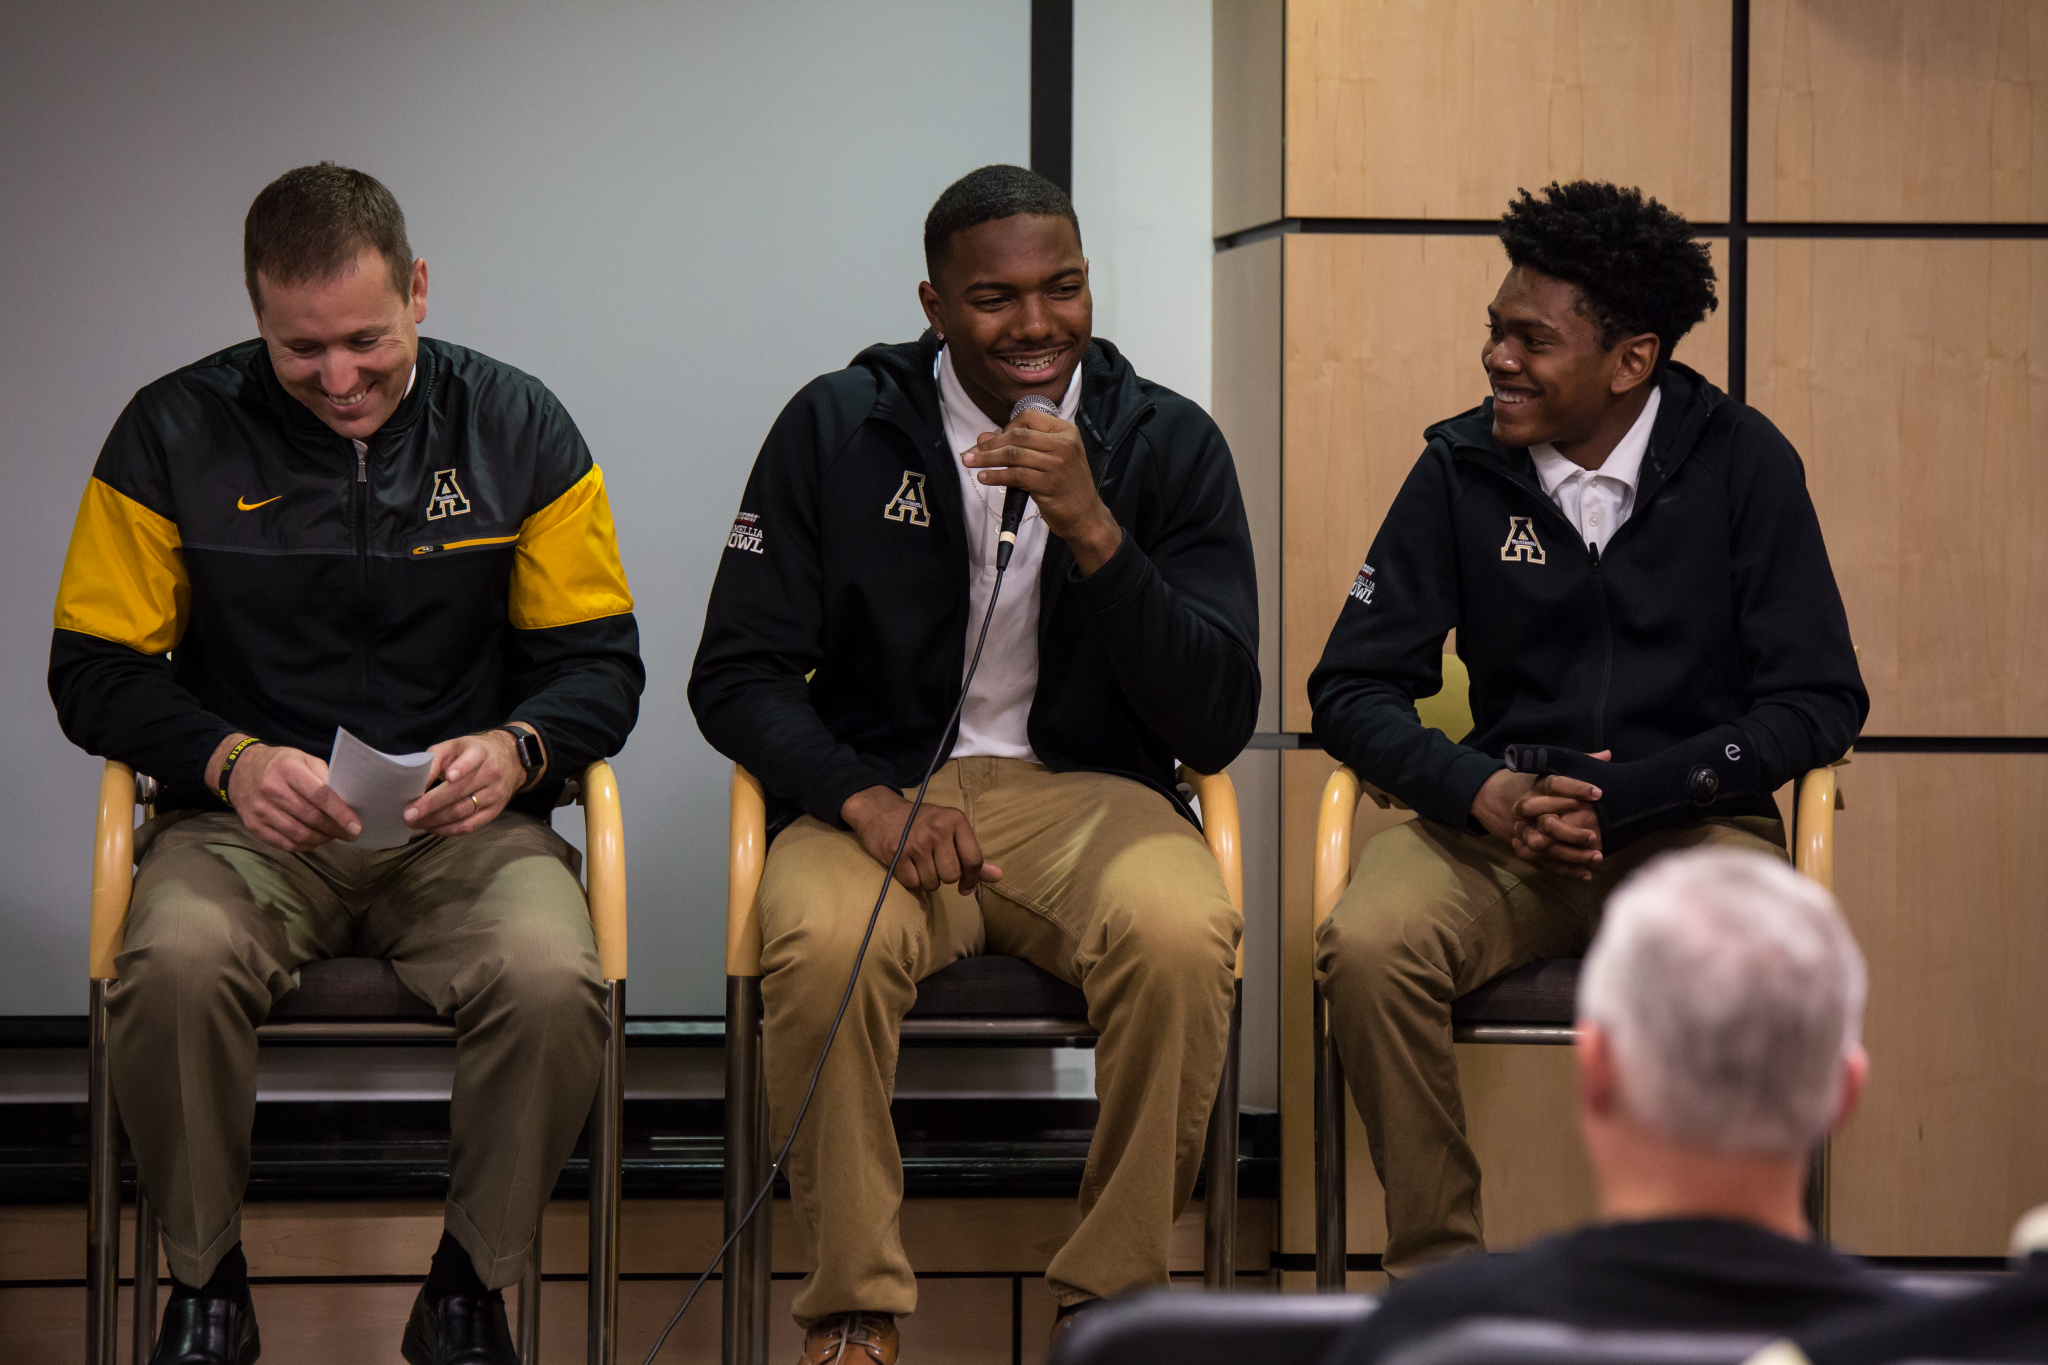 Football recruit Jermaine McDaniel discusses what attracted him to Appalachian State, as well as what he hopes to bring to the football program. 